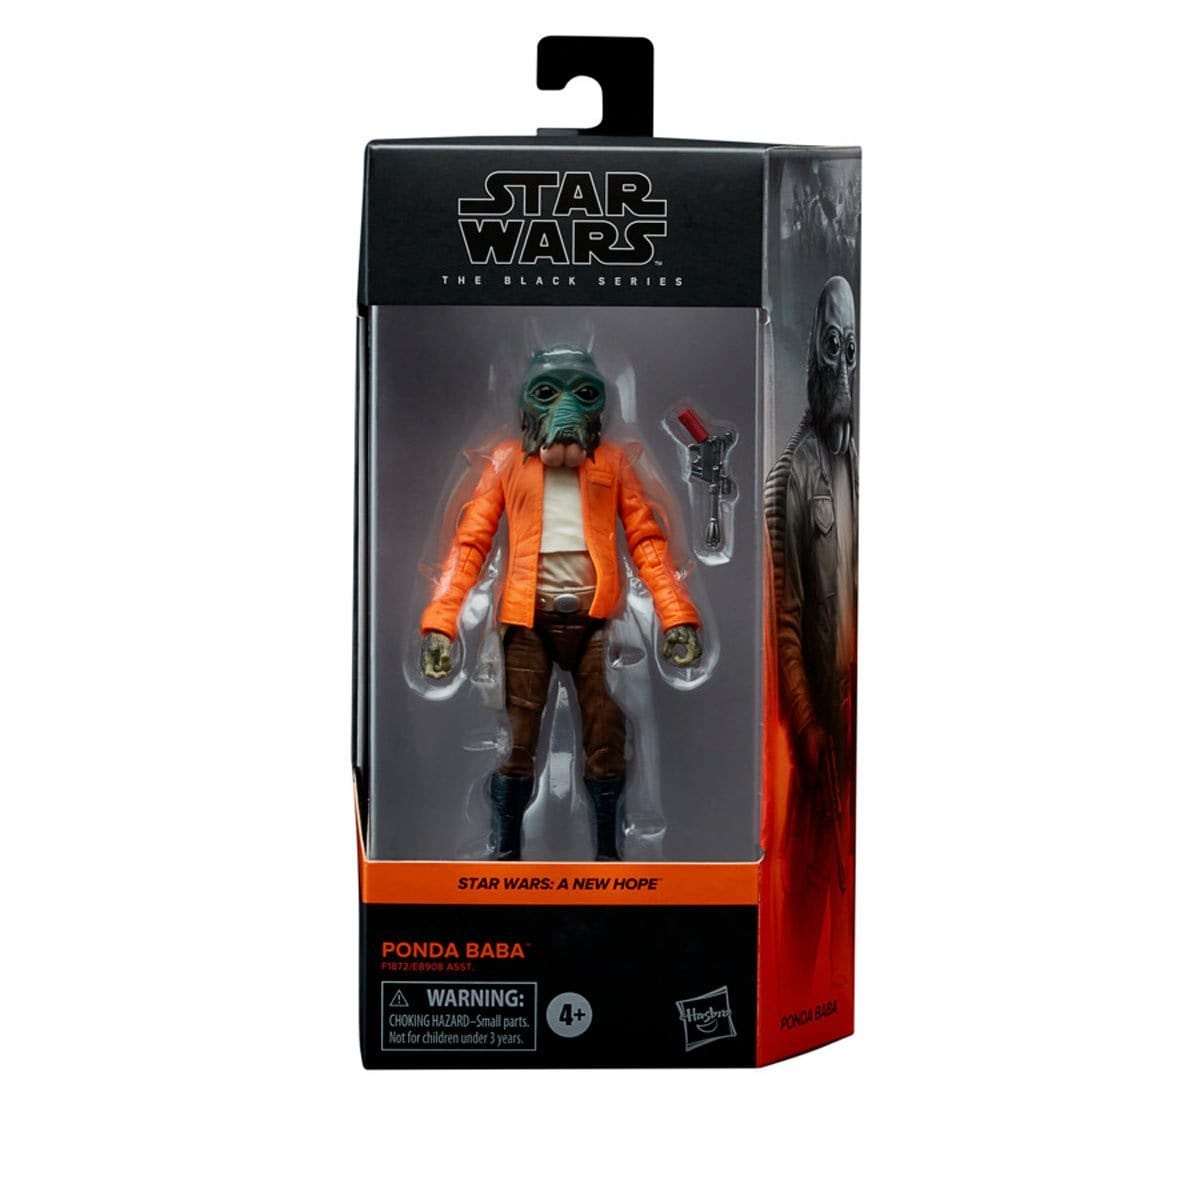 Star Wars The Black Series Ponda Baba 6-Inch Action Figure - Redshift7toys.com